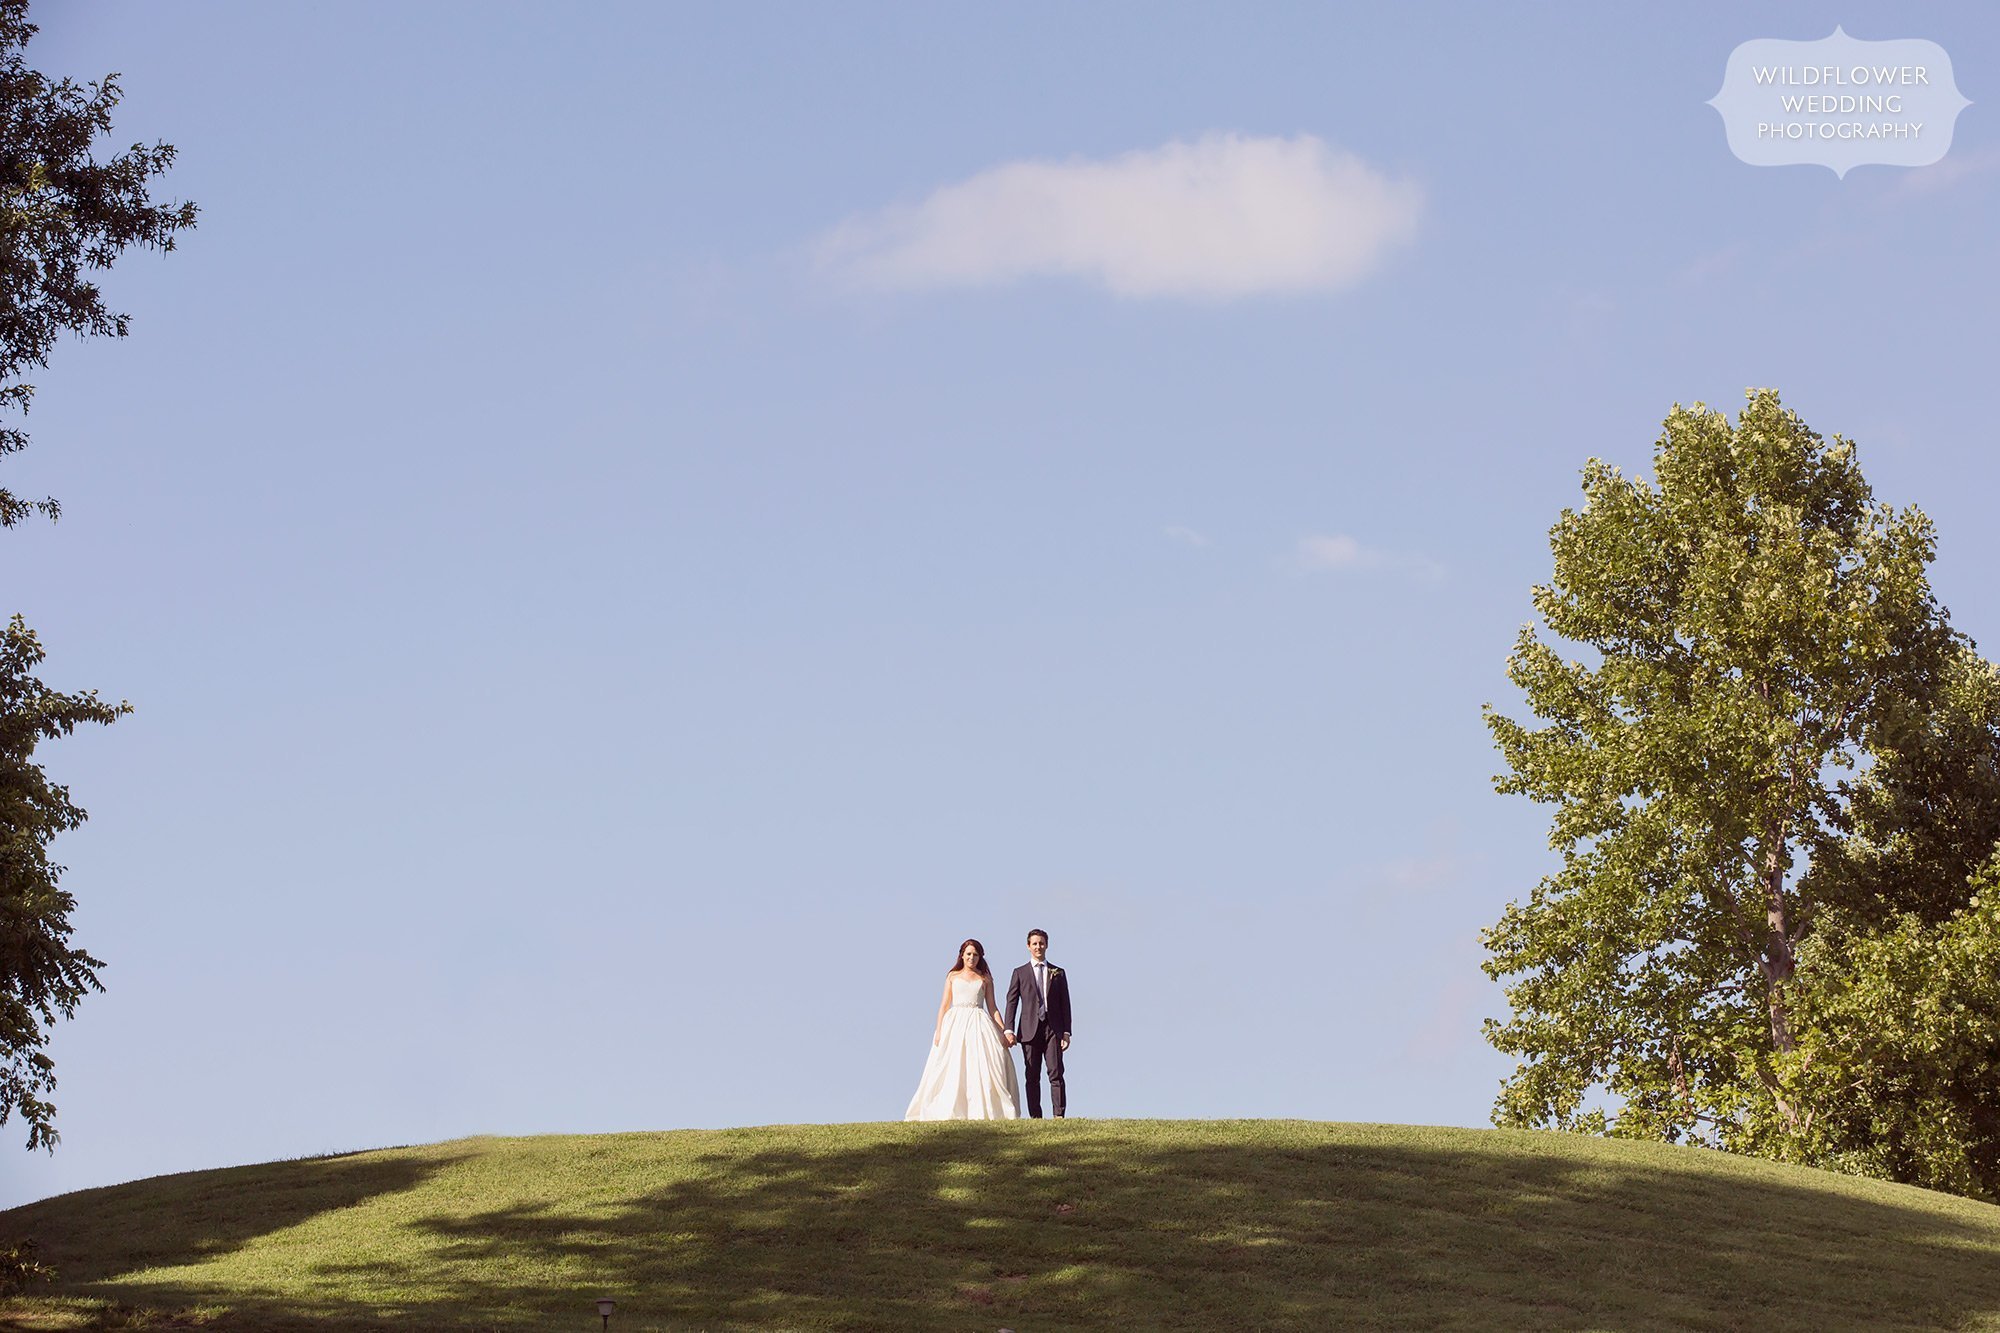 Artistic photo of the bride and groom standing on a hill at the Les Bourgeois Winery for their outdoor summer wedding in Rocheport, MO.